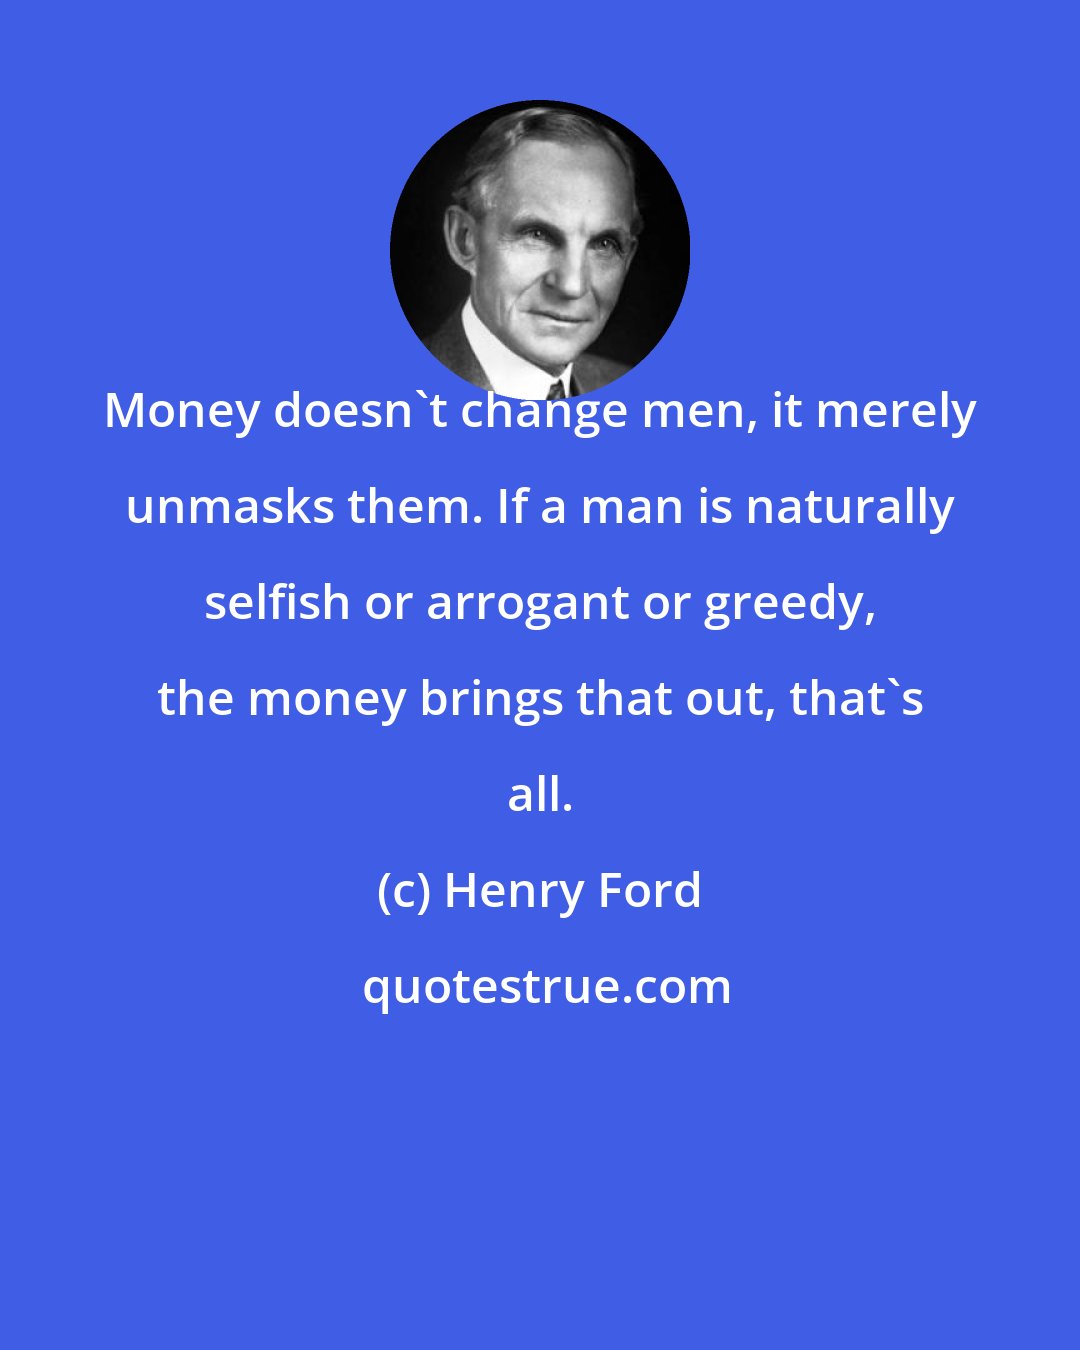 Henry Ford: Money doesn't change men, it merely unmasks them. If a man is naturally selfish or arrogant or greedy, the money brings that out, that's all.